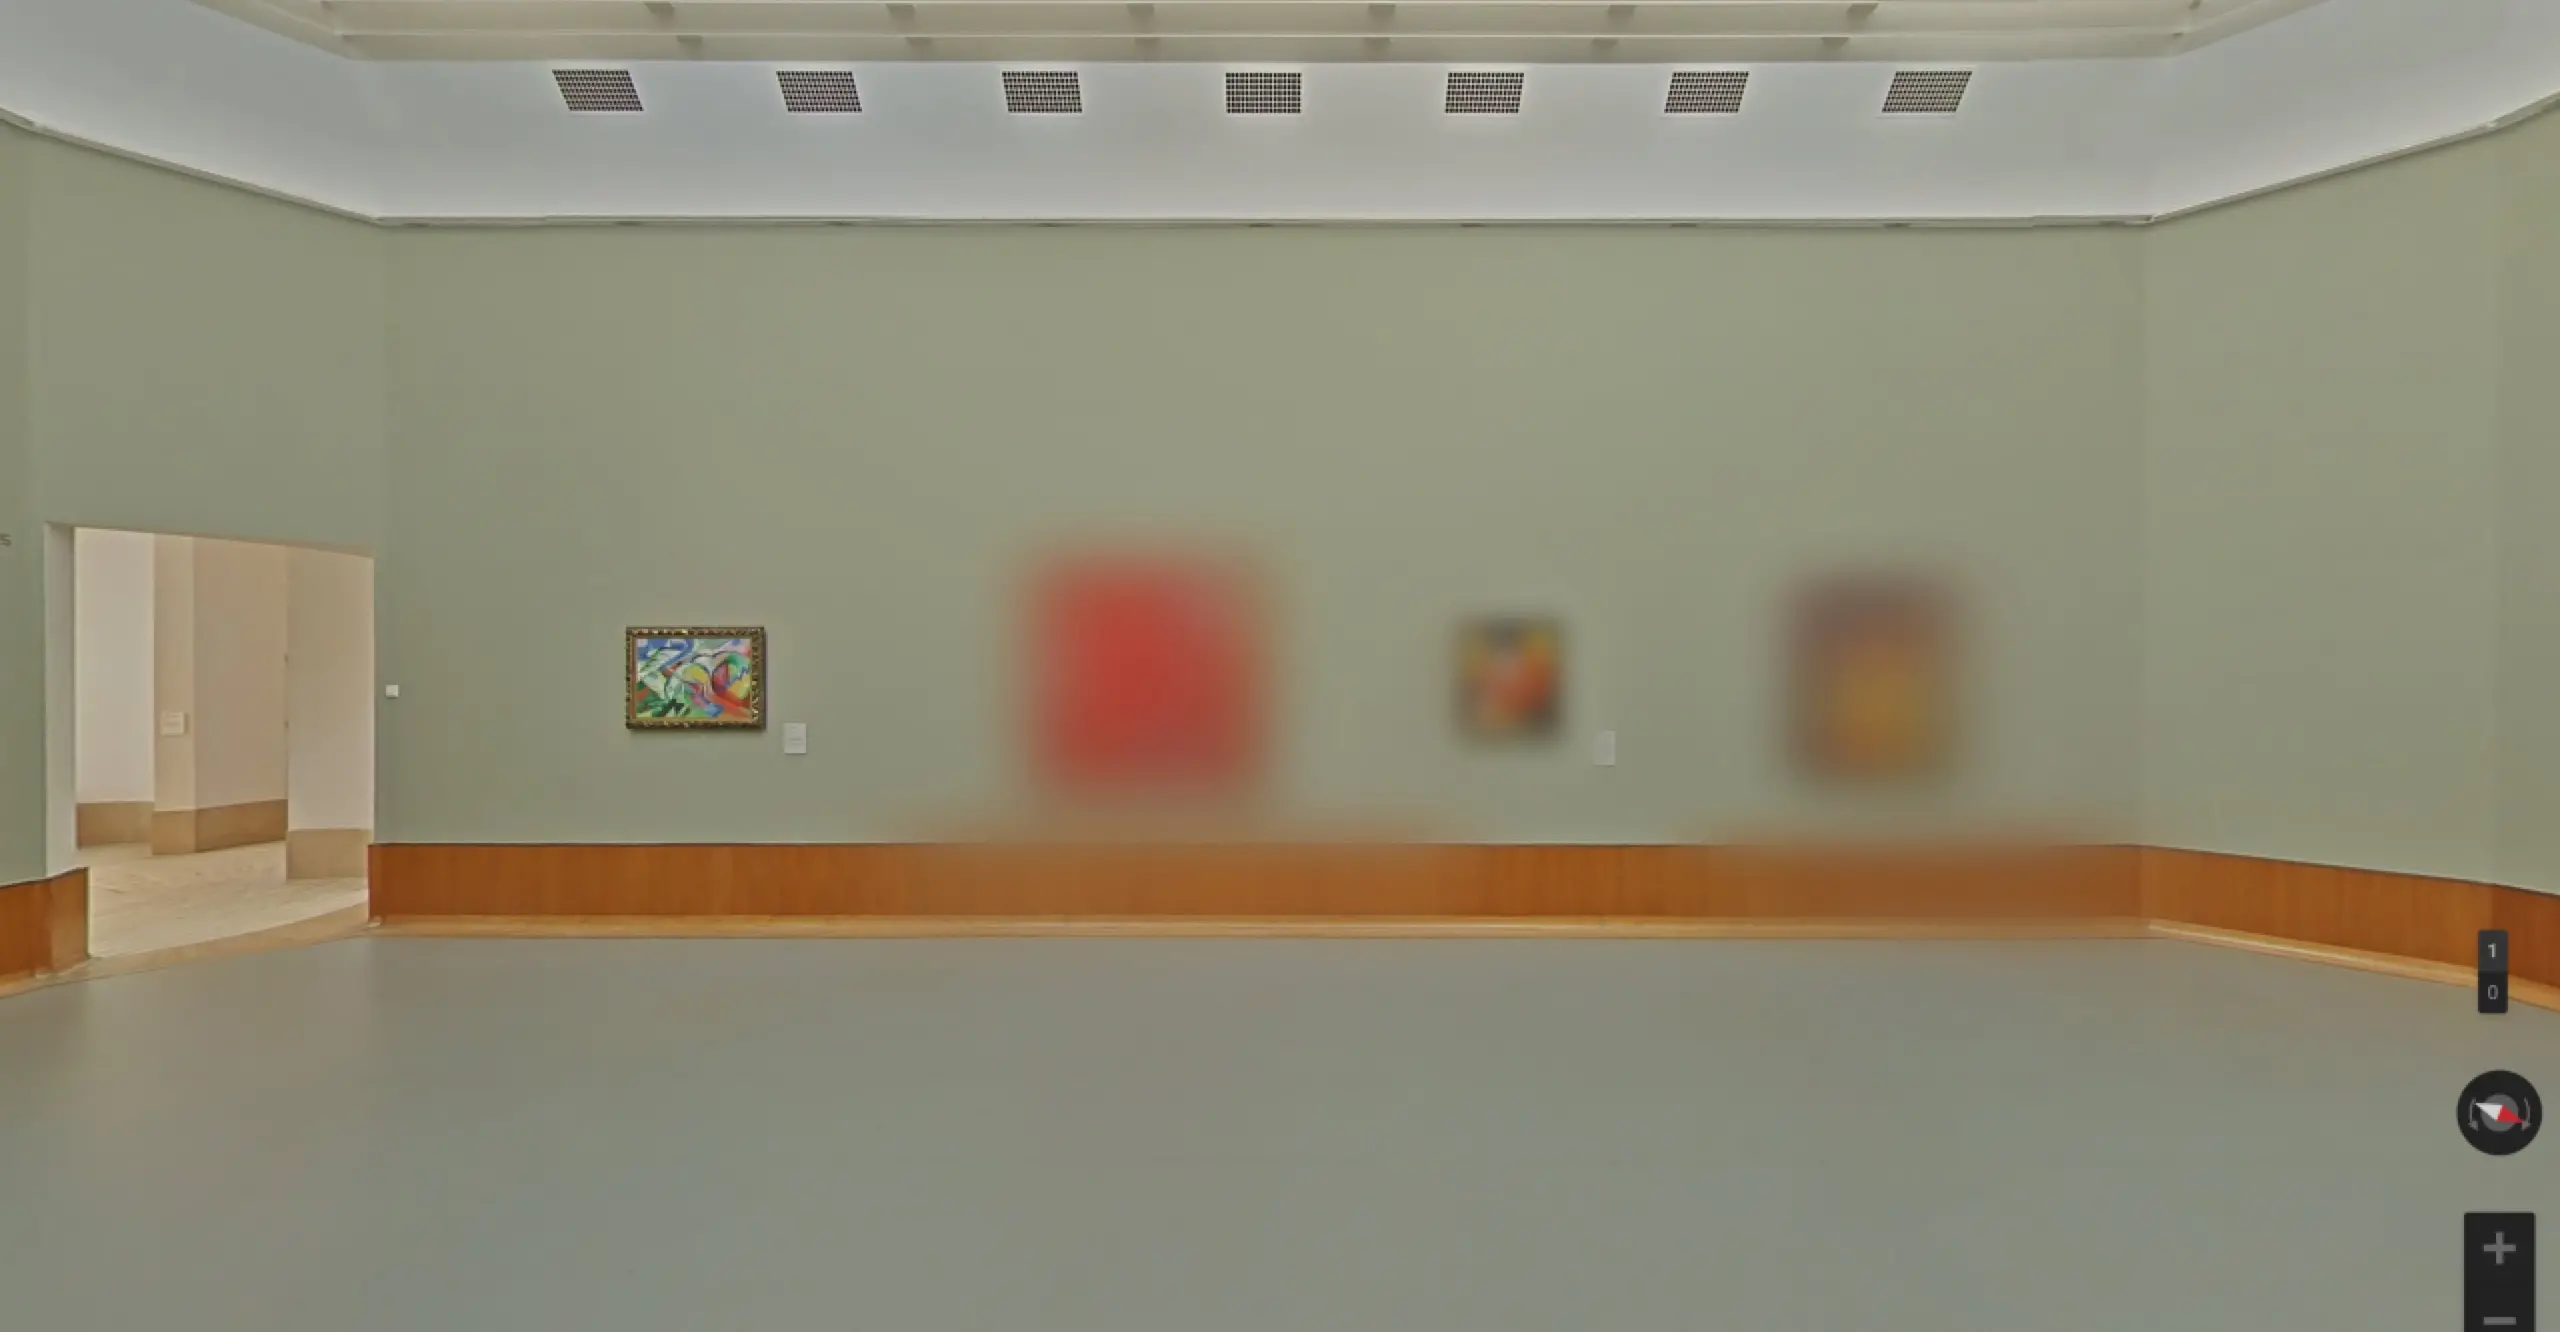 Gallery room with some images blurred and some in focus